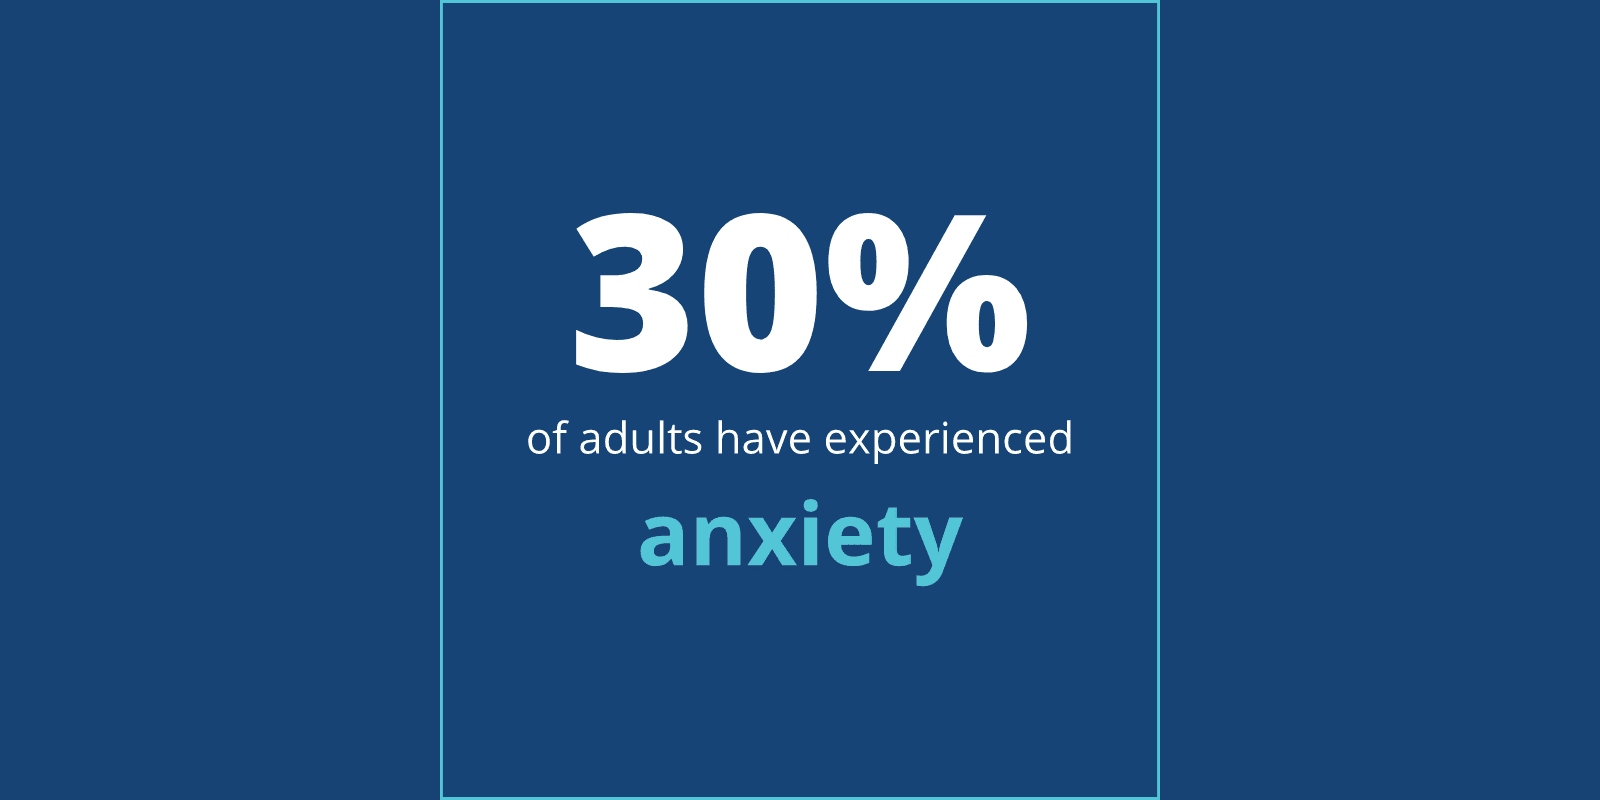 30% of adults have experienced anxiety